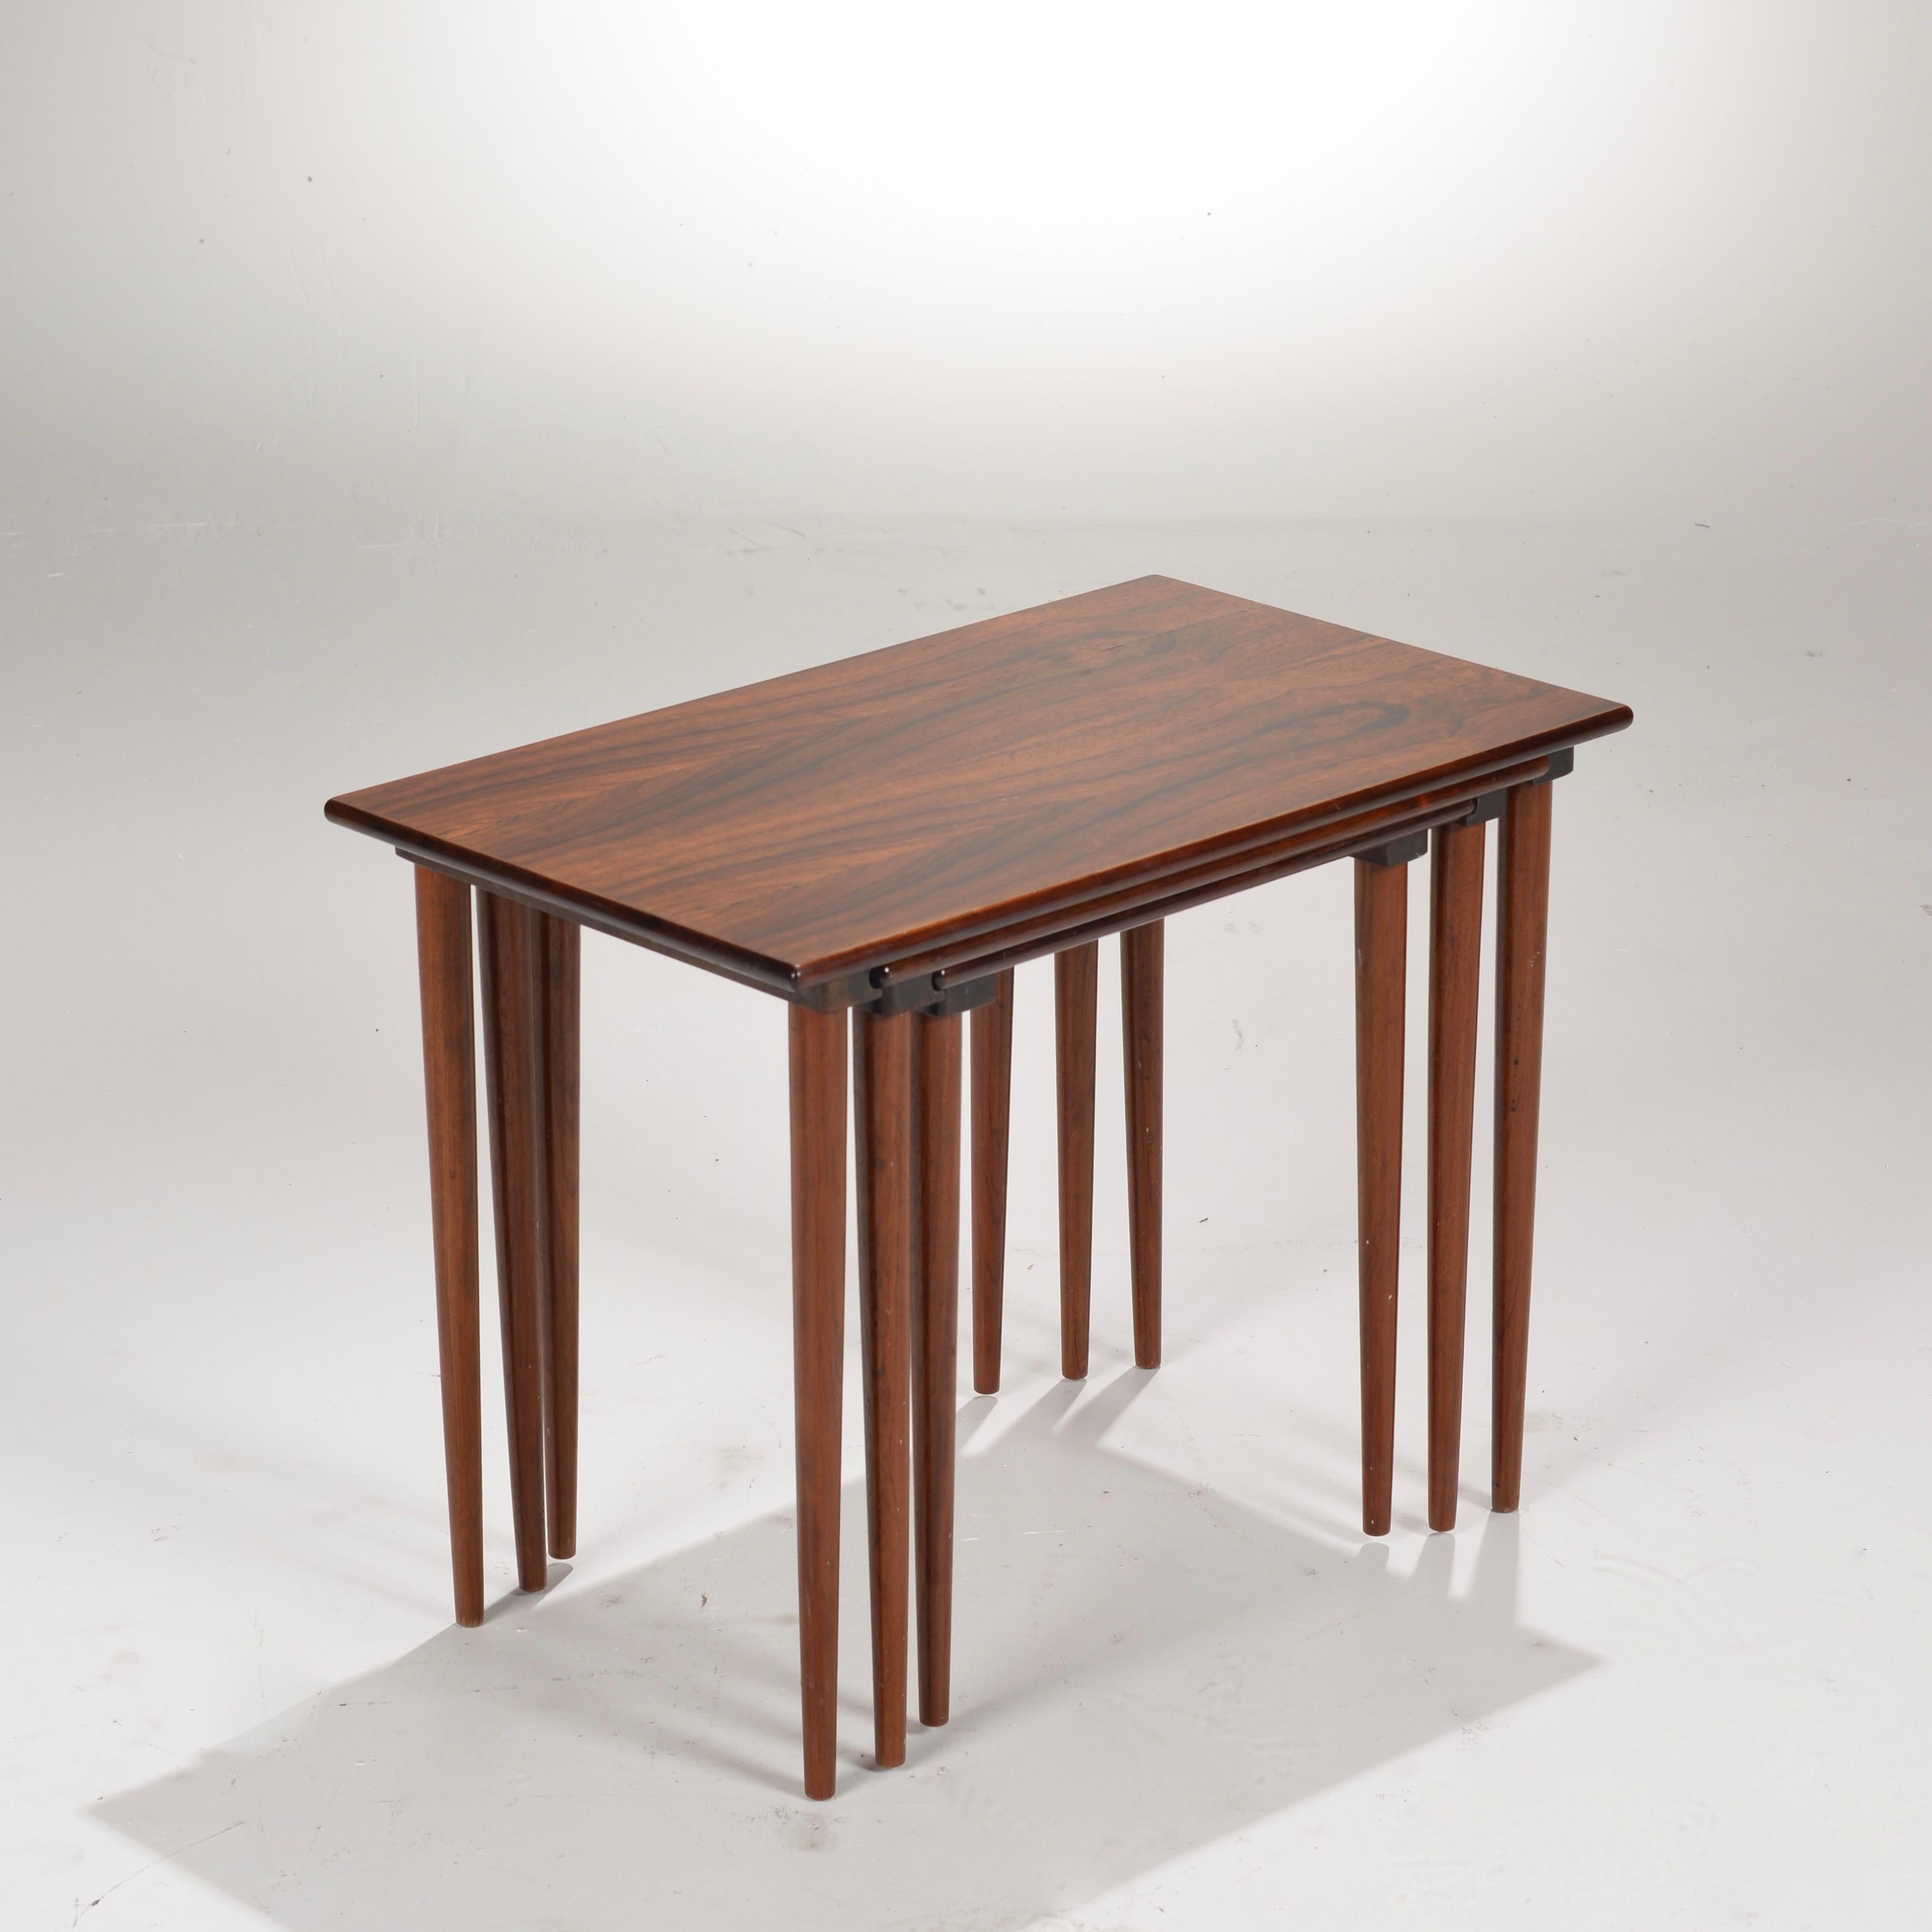 Stunning set of Danish made Brazilian rosewood nesting tables. The smaller tables actually nest into the bottom overlapping grove of its larger table, enabling the set to be picked up and moved as a set. 

All items are viewable at our Los Angeles